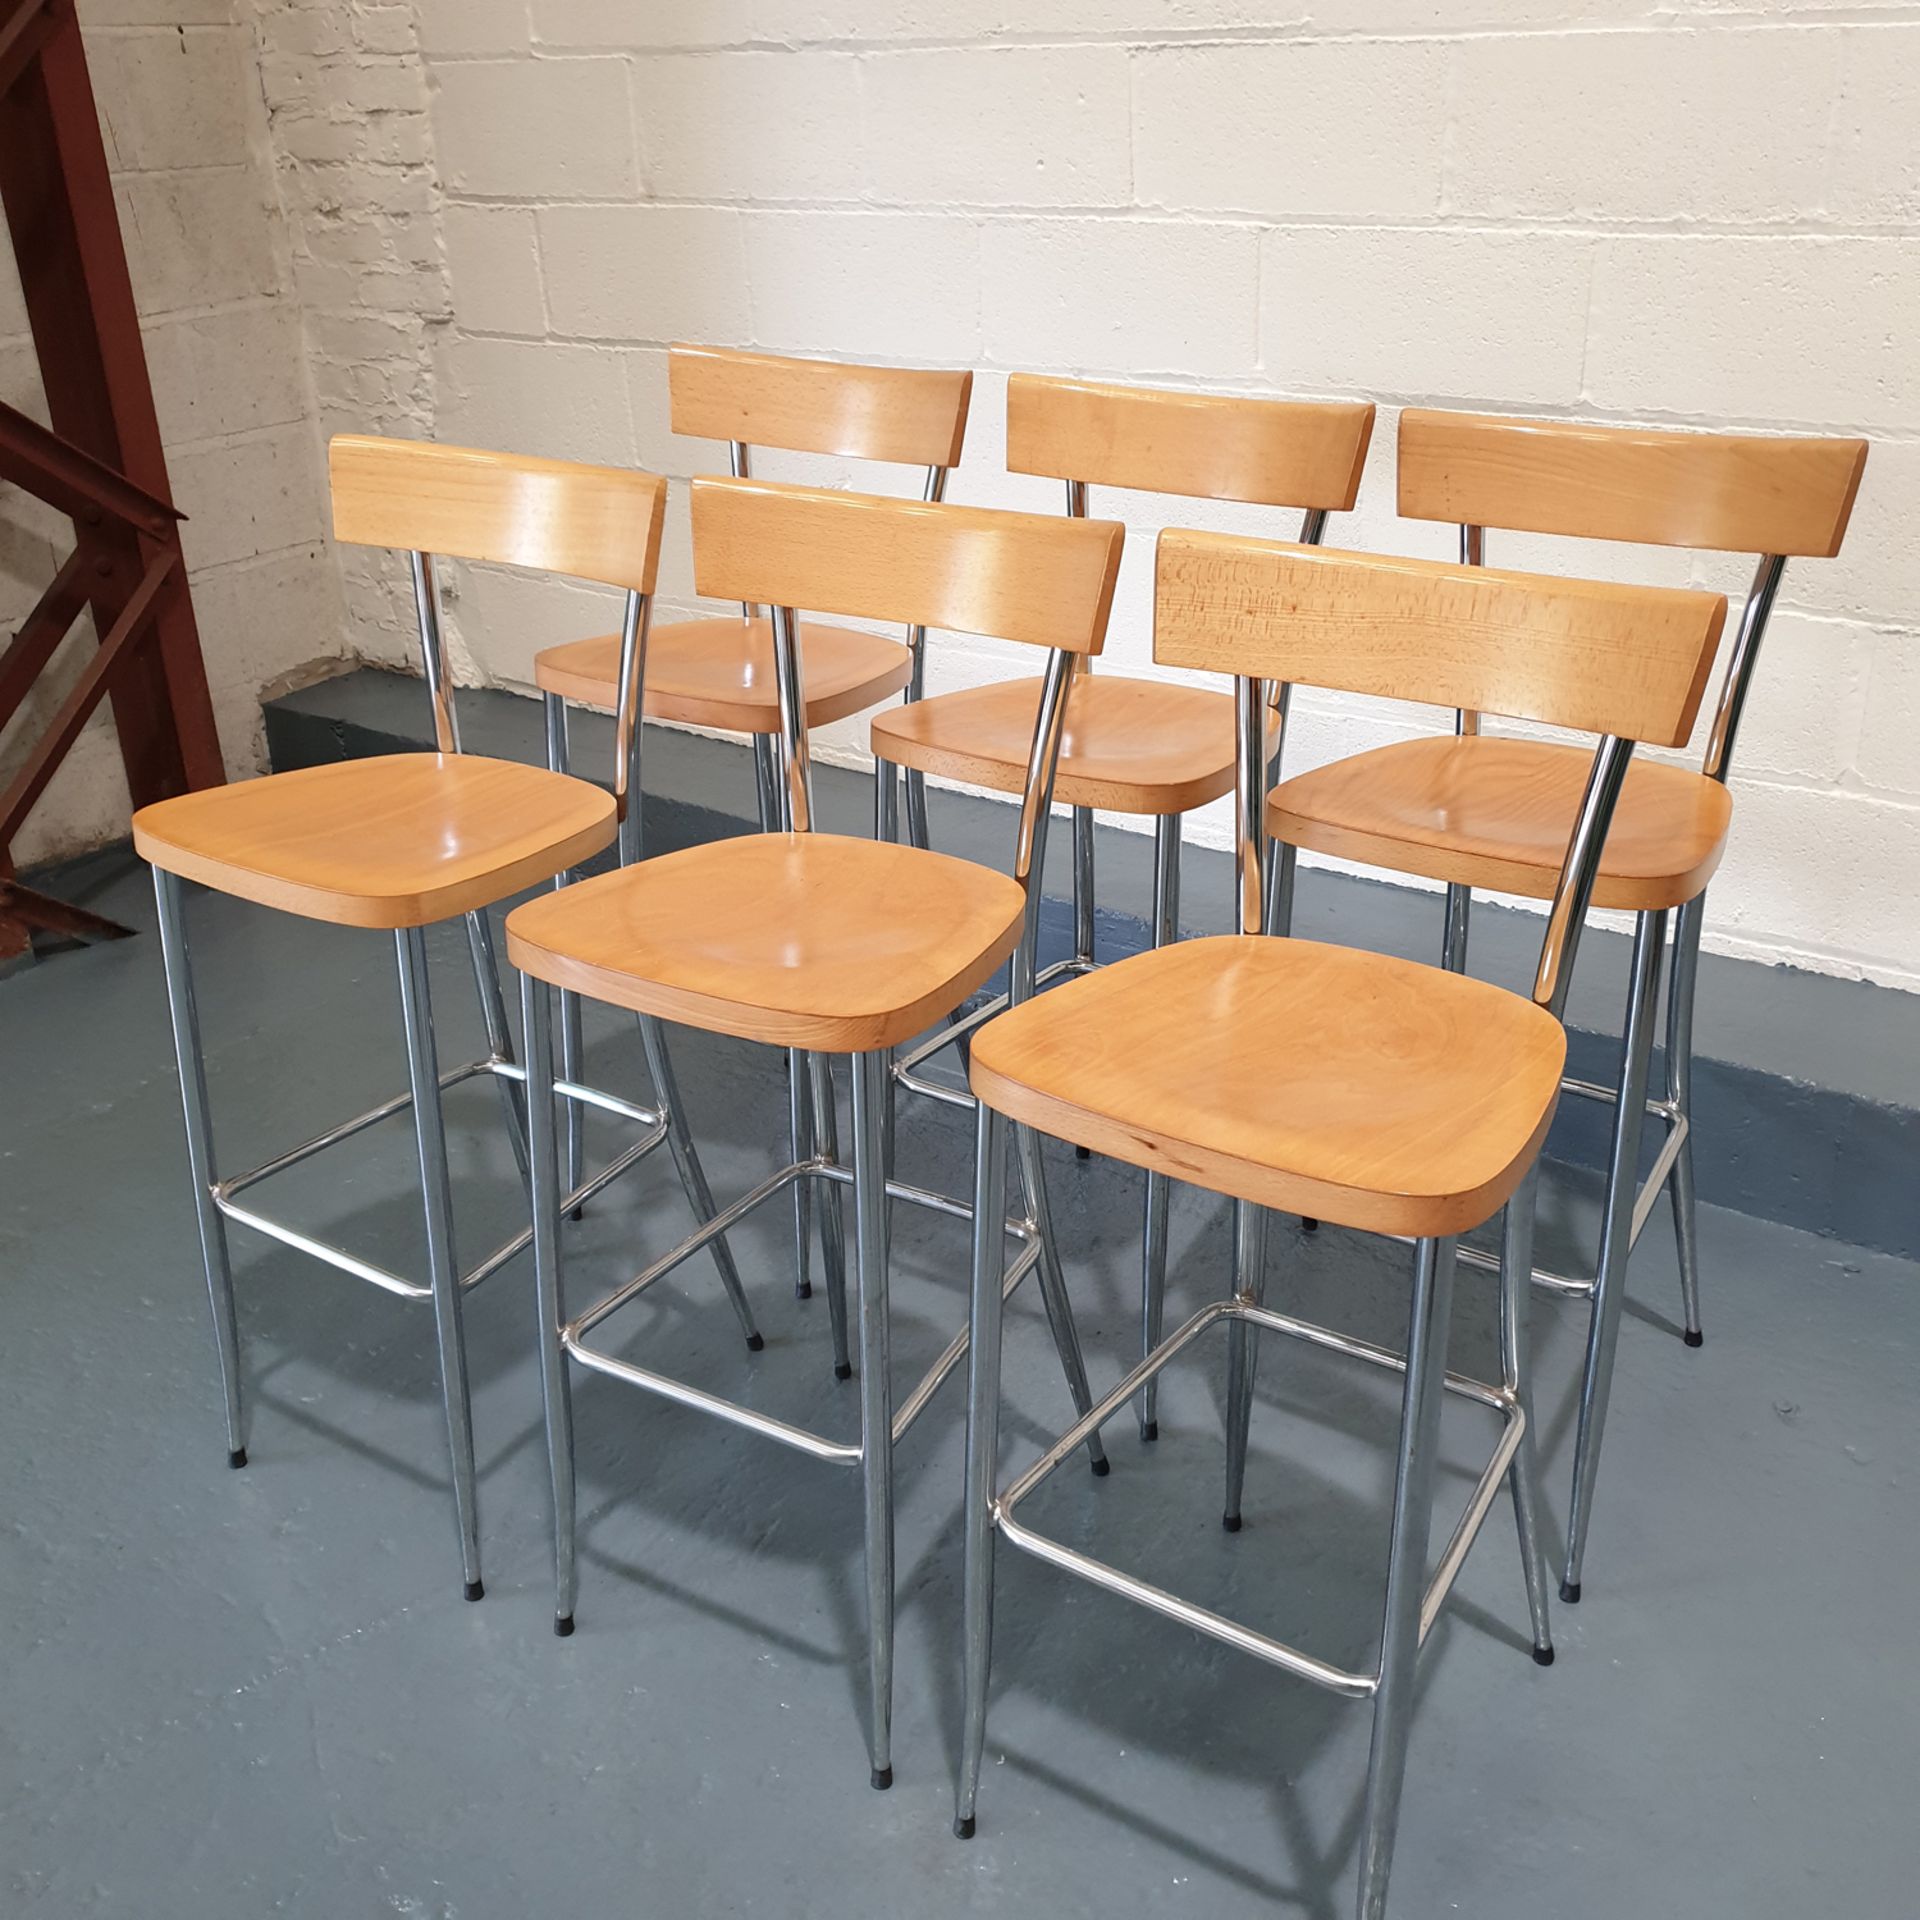 6 x Wood and Steel Bar Stools. - Image 3 of 4